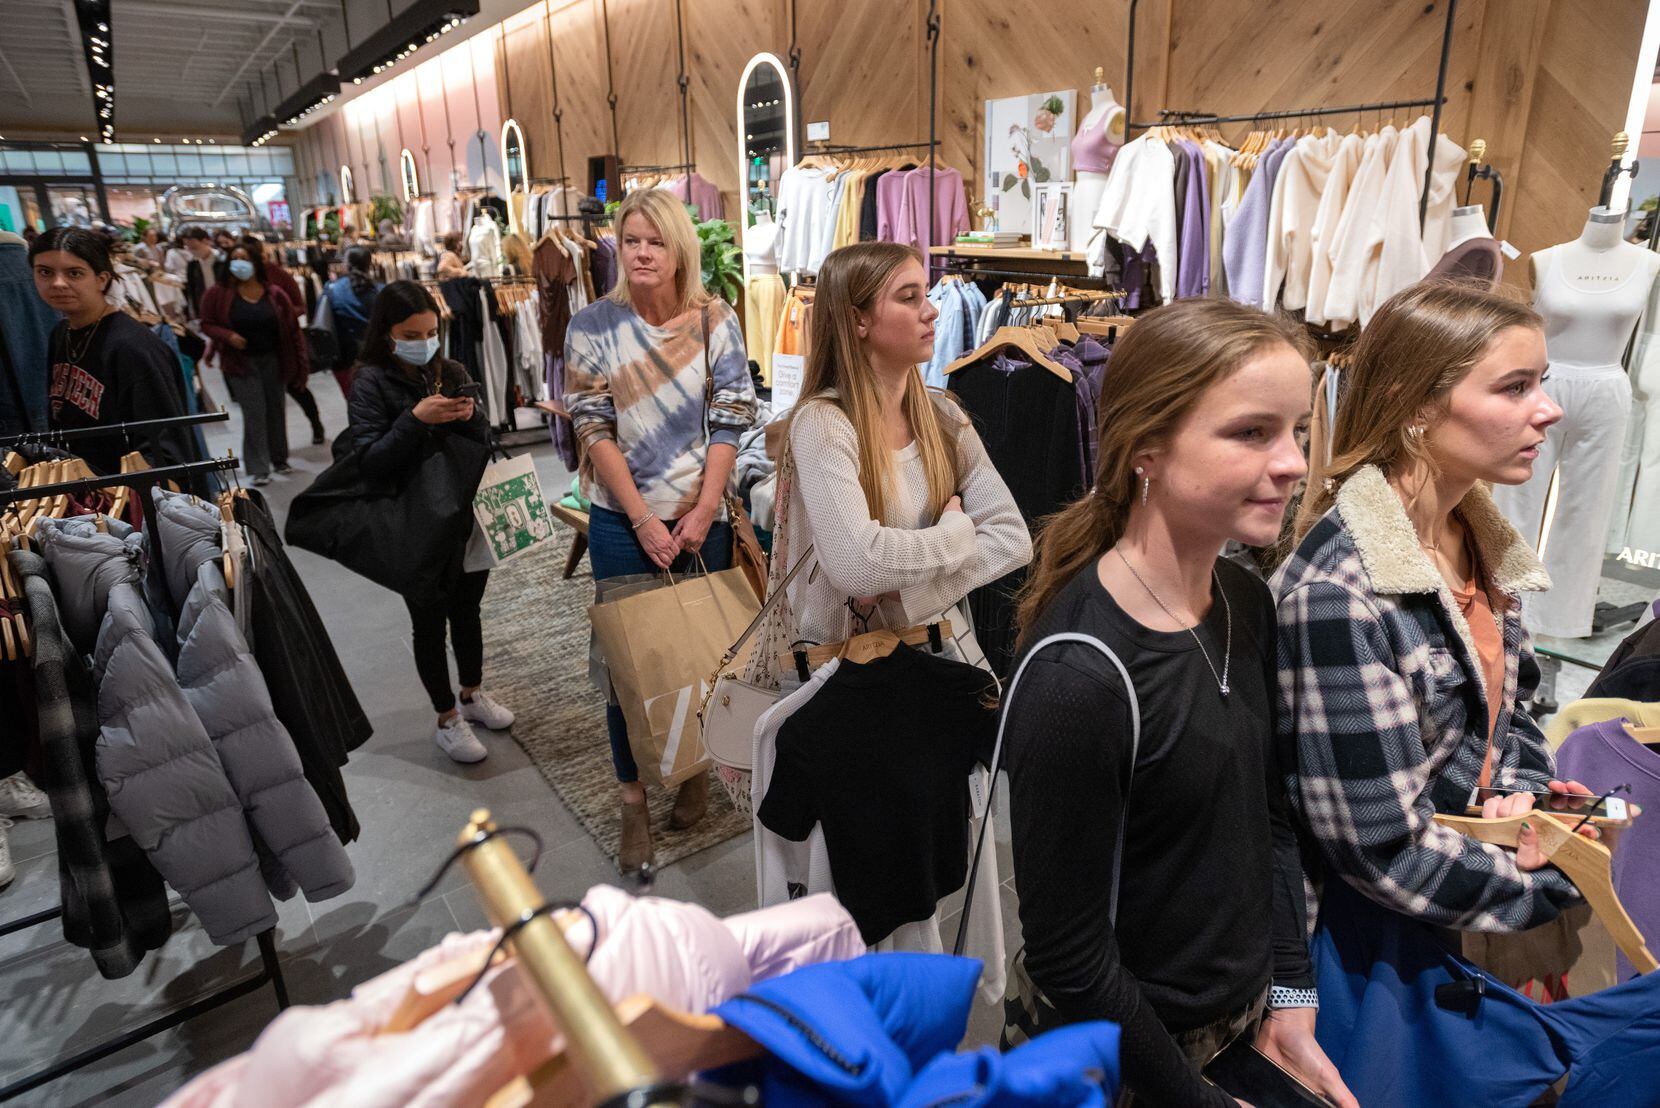 Brooke Baker, 16, center, Brooklyn Brothers, 16, right, and Micah Tuthill, 16, far-right, wait in line with other shoppers to pay for merchandise inside of Aritzia on Black Friday at NorthPark Center in Dallas, on Friday, Nov. 26, 2021. 